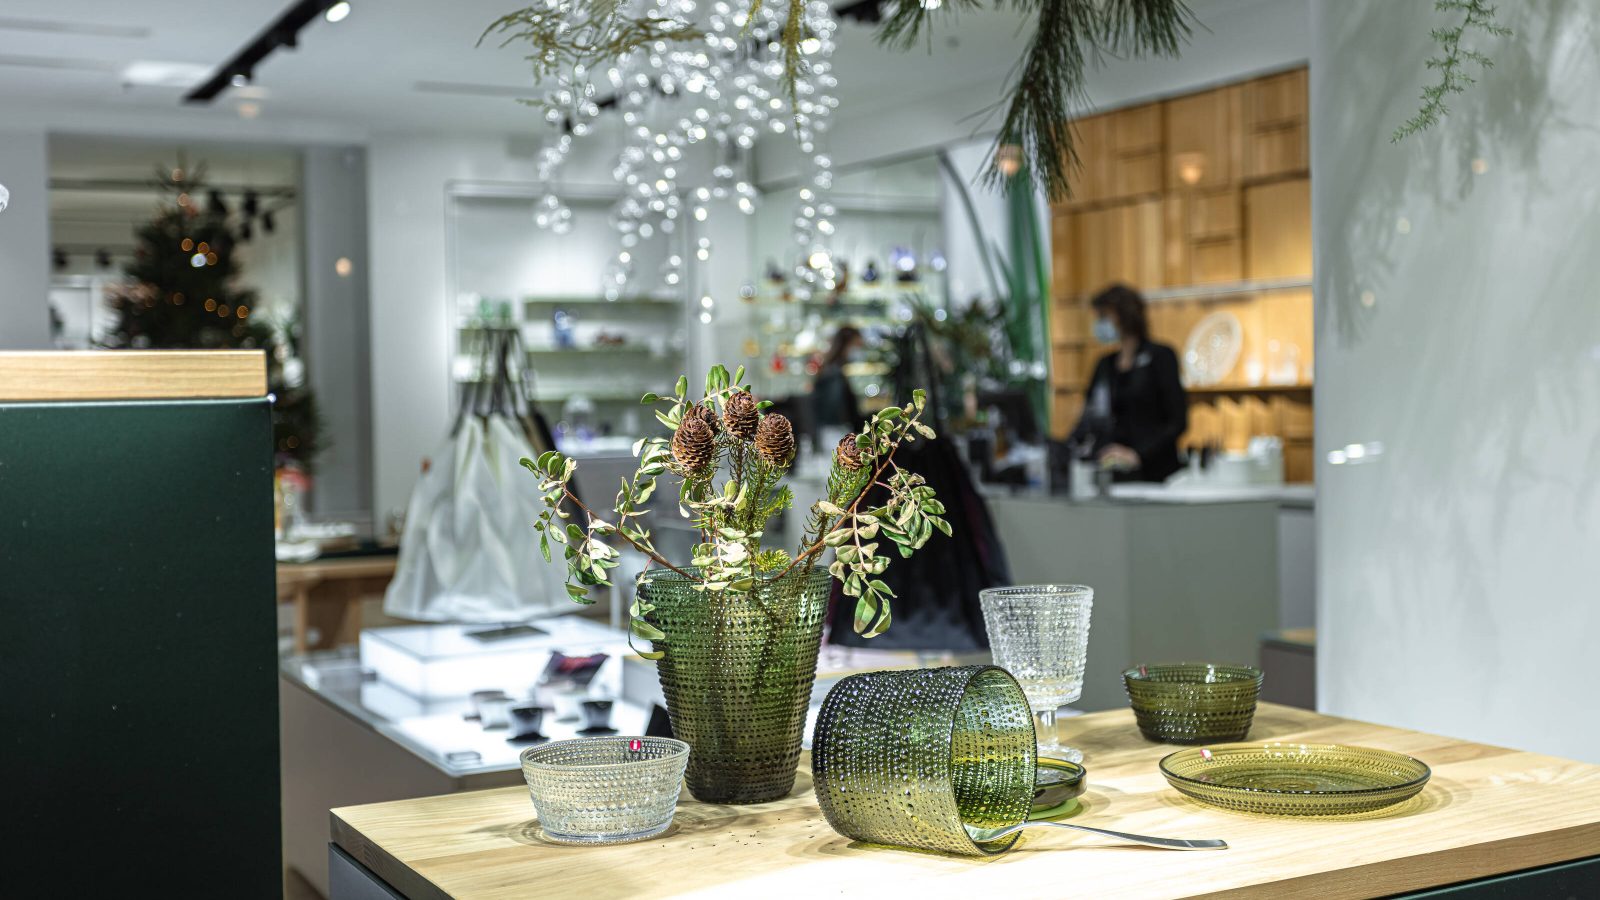 Inside of an Iittala store with vases, plates and flowers displayed